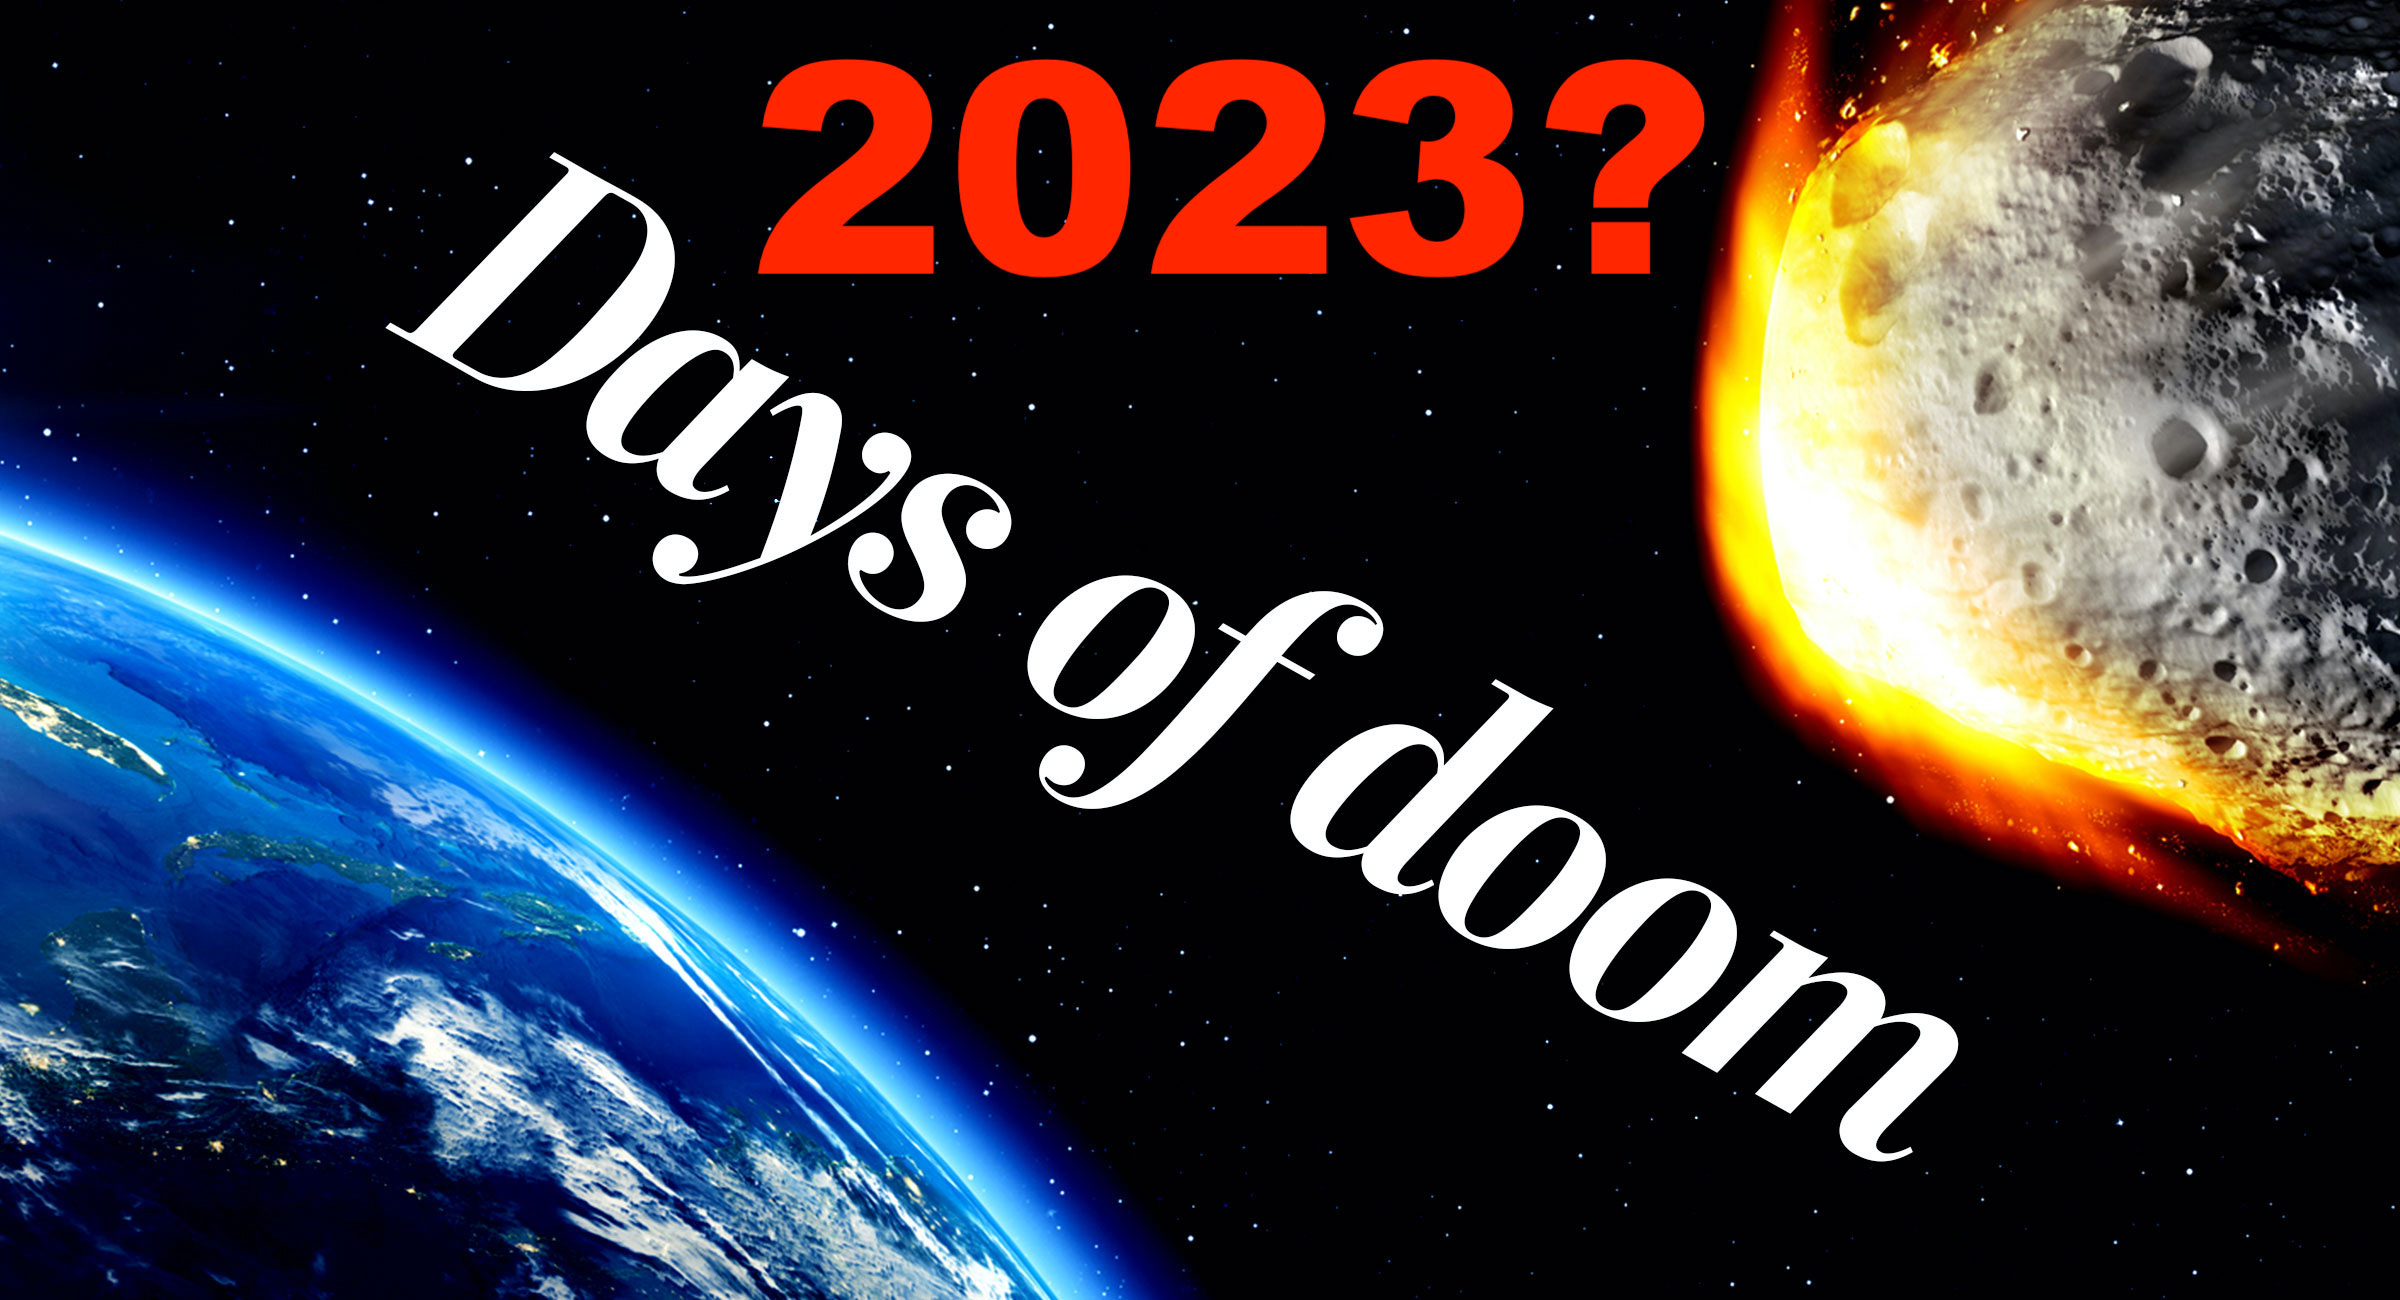 Robert Singer Explains Why the World Will End in 2023